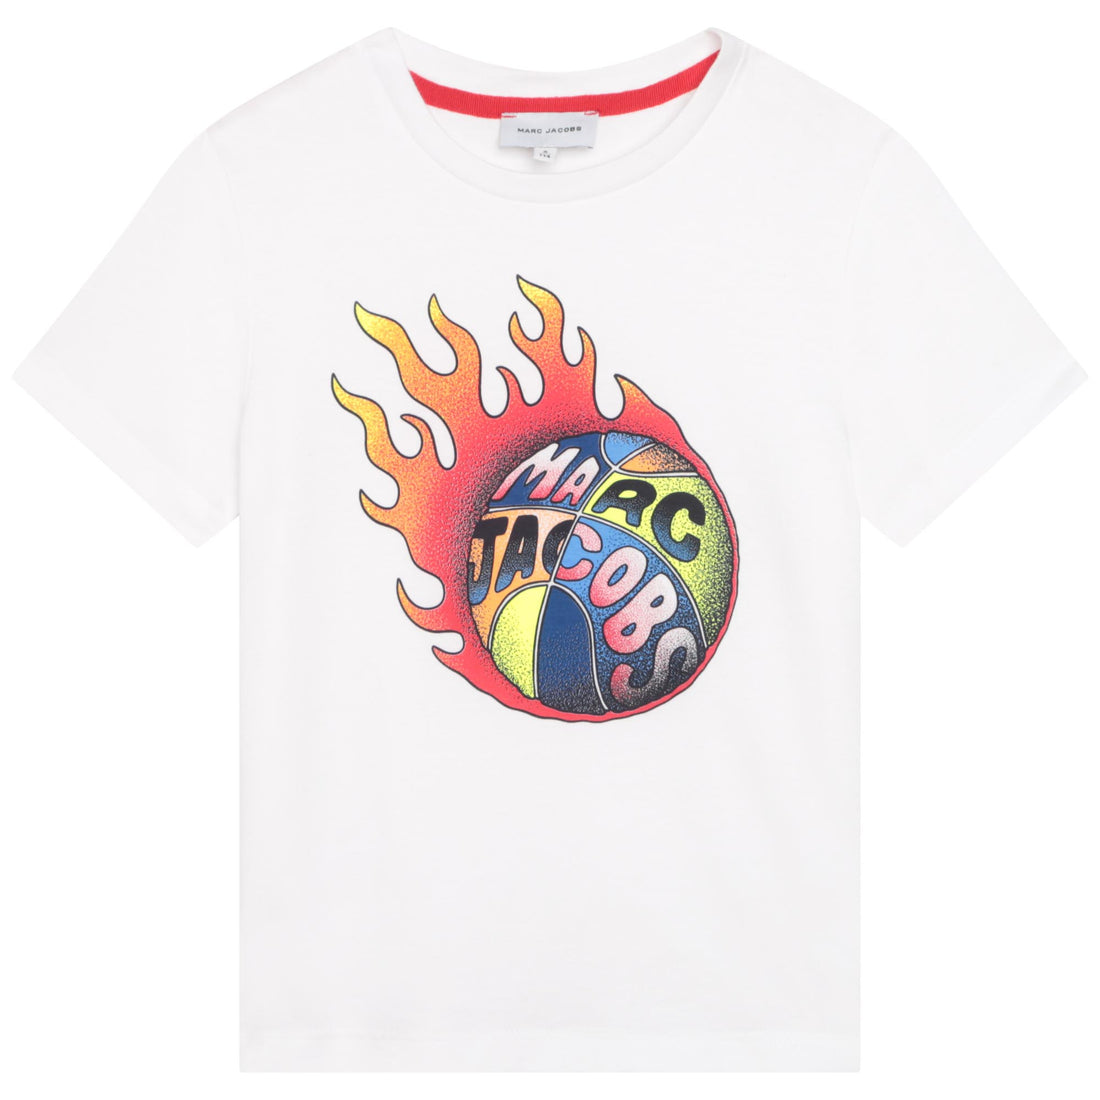 Marc Jacobs Short Sleeves Tee-Shirt Style: W25597